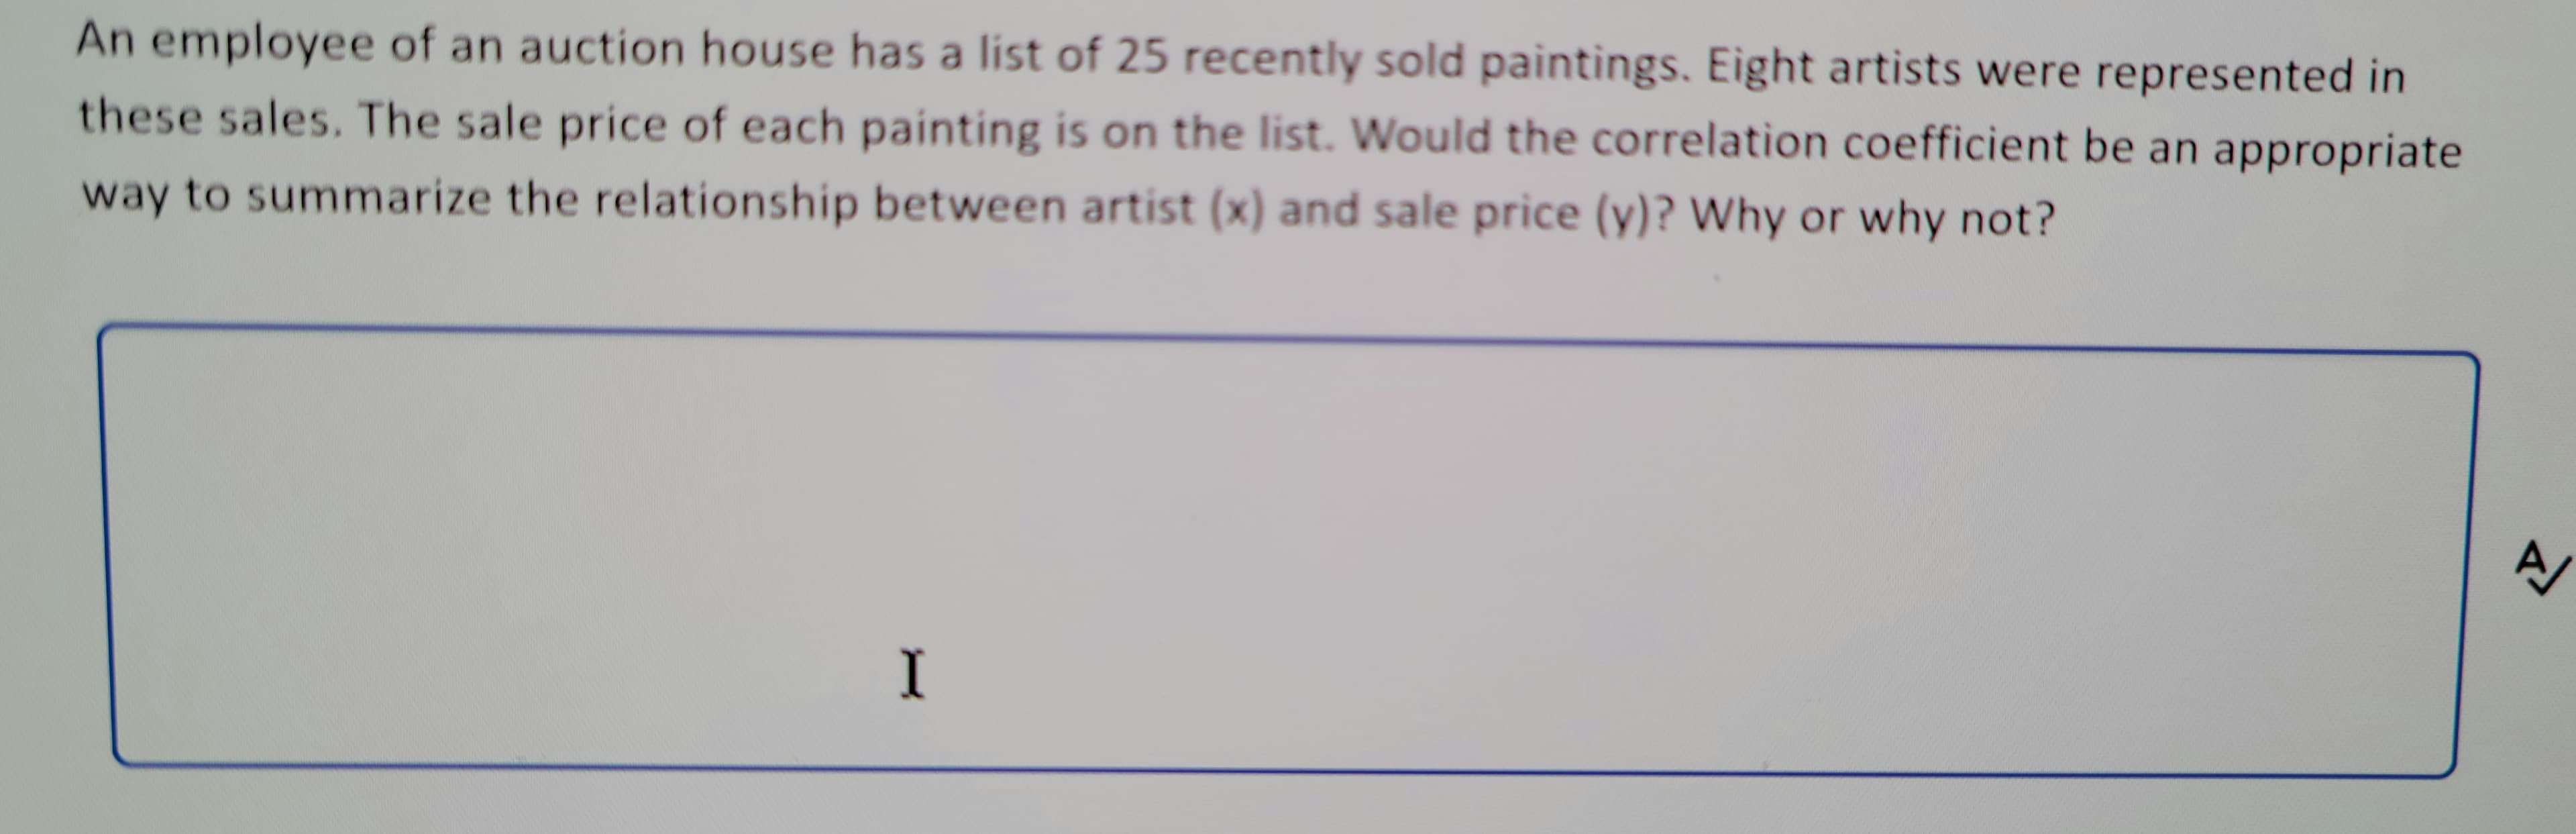 An employee of an auction house has a list of 25 recently sold paintings. Eight artists were represented in
these sales. The sale price of each painting is on the list. Would the correlation coefficient be an appropriate
way to summarize the relationship between artist (x) and sale price (y)? Why or why not?
